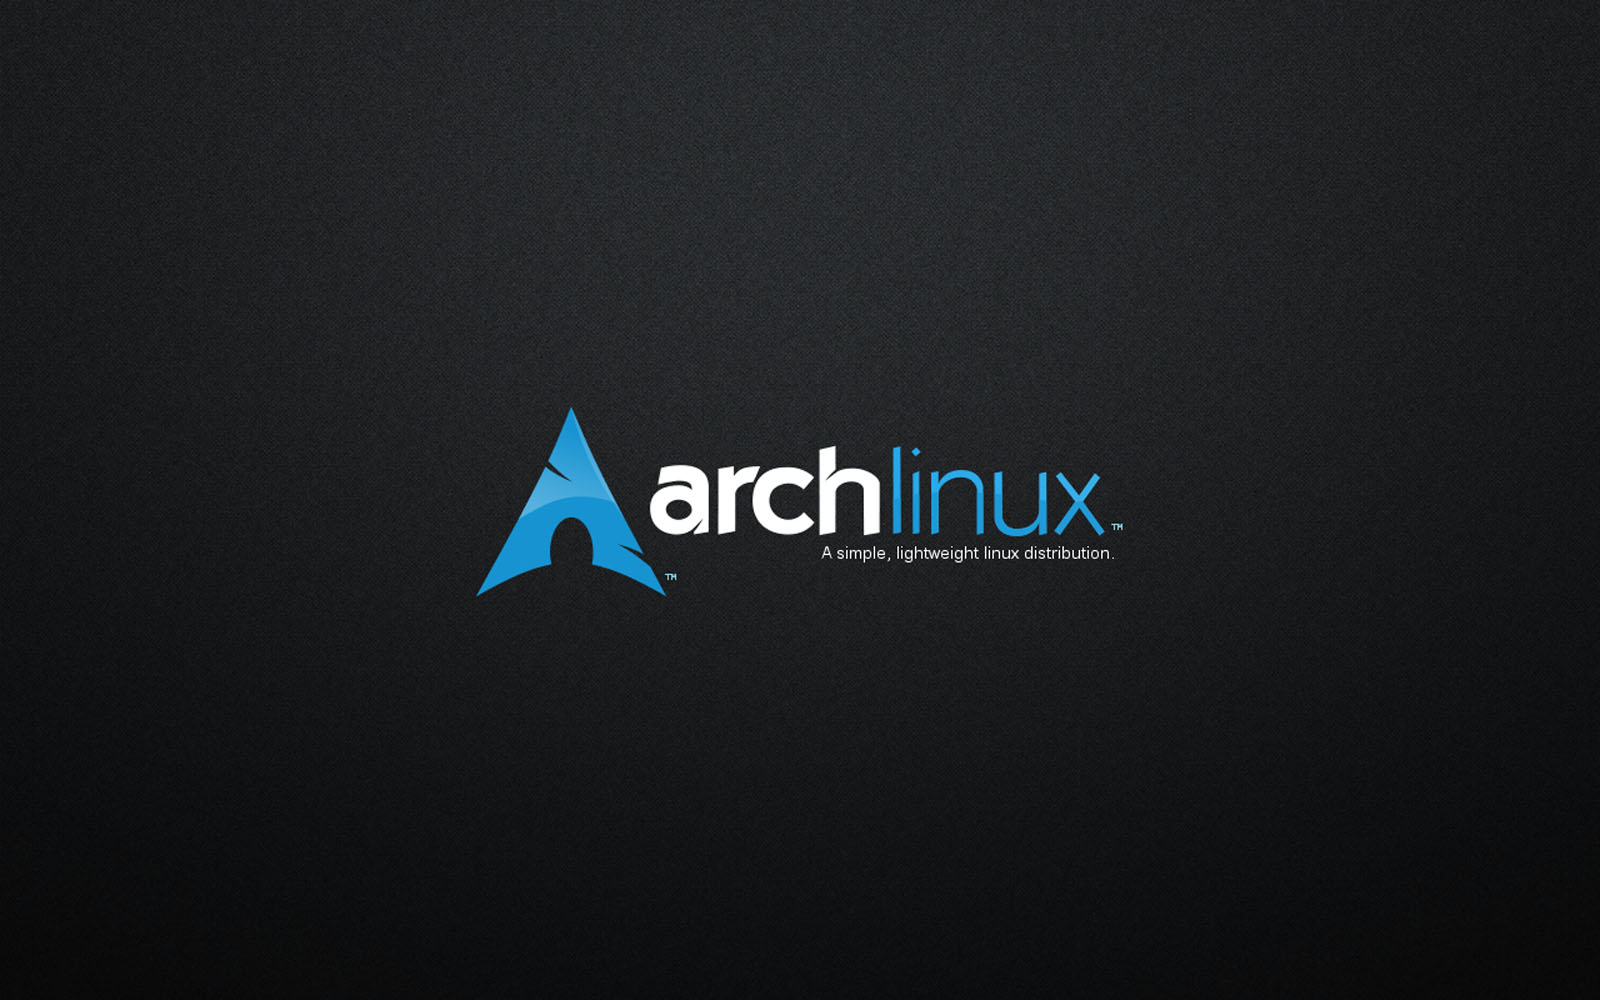 Wallpapers Arch Linux Wallpapers HD Wallpapers Download Free Map Images Wallpaper [wallpaper376.blogspot.com]